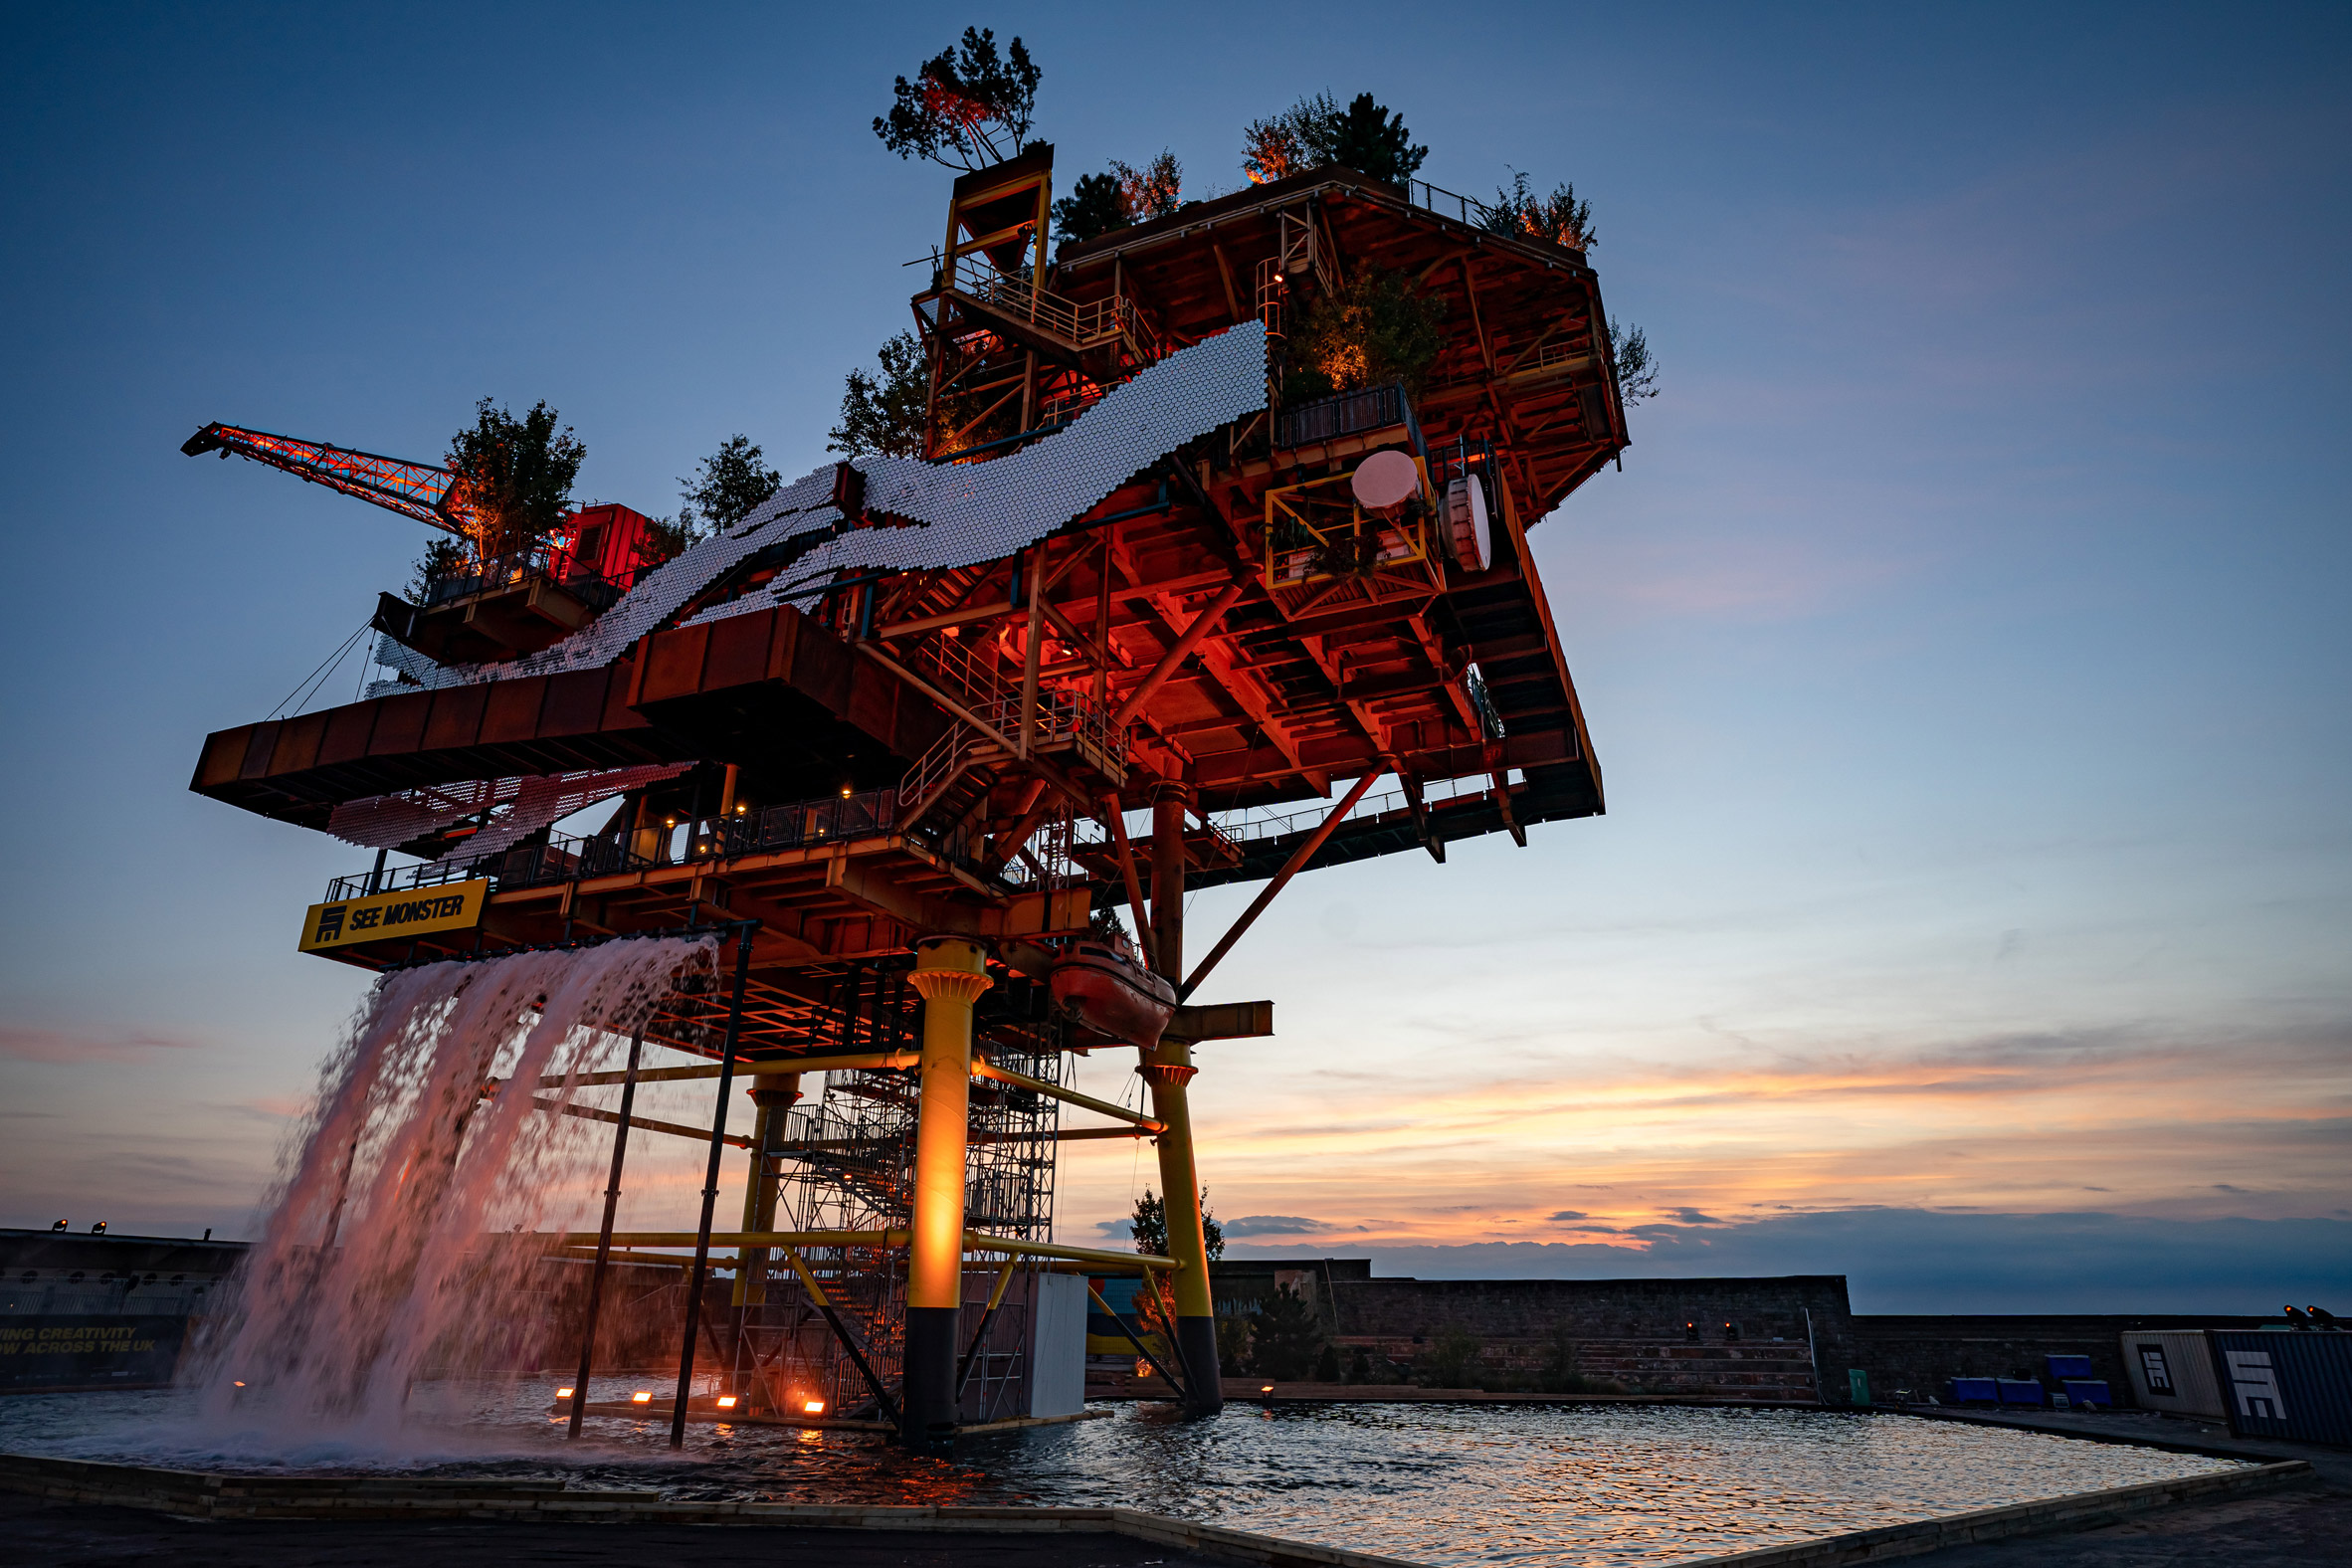 Newsubstance creates 35-metre-tall See Monster from North Sea gas rig